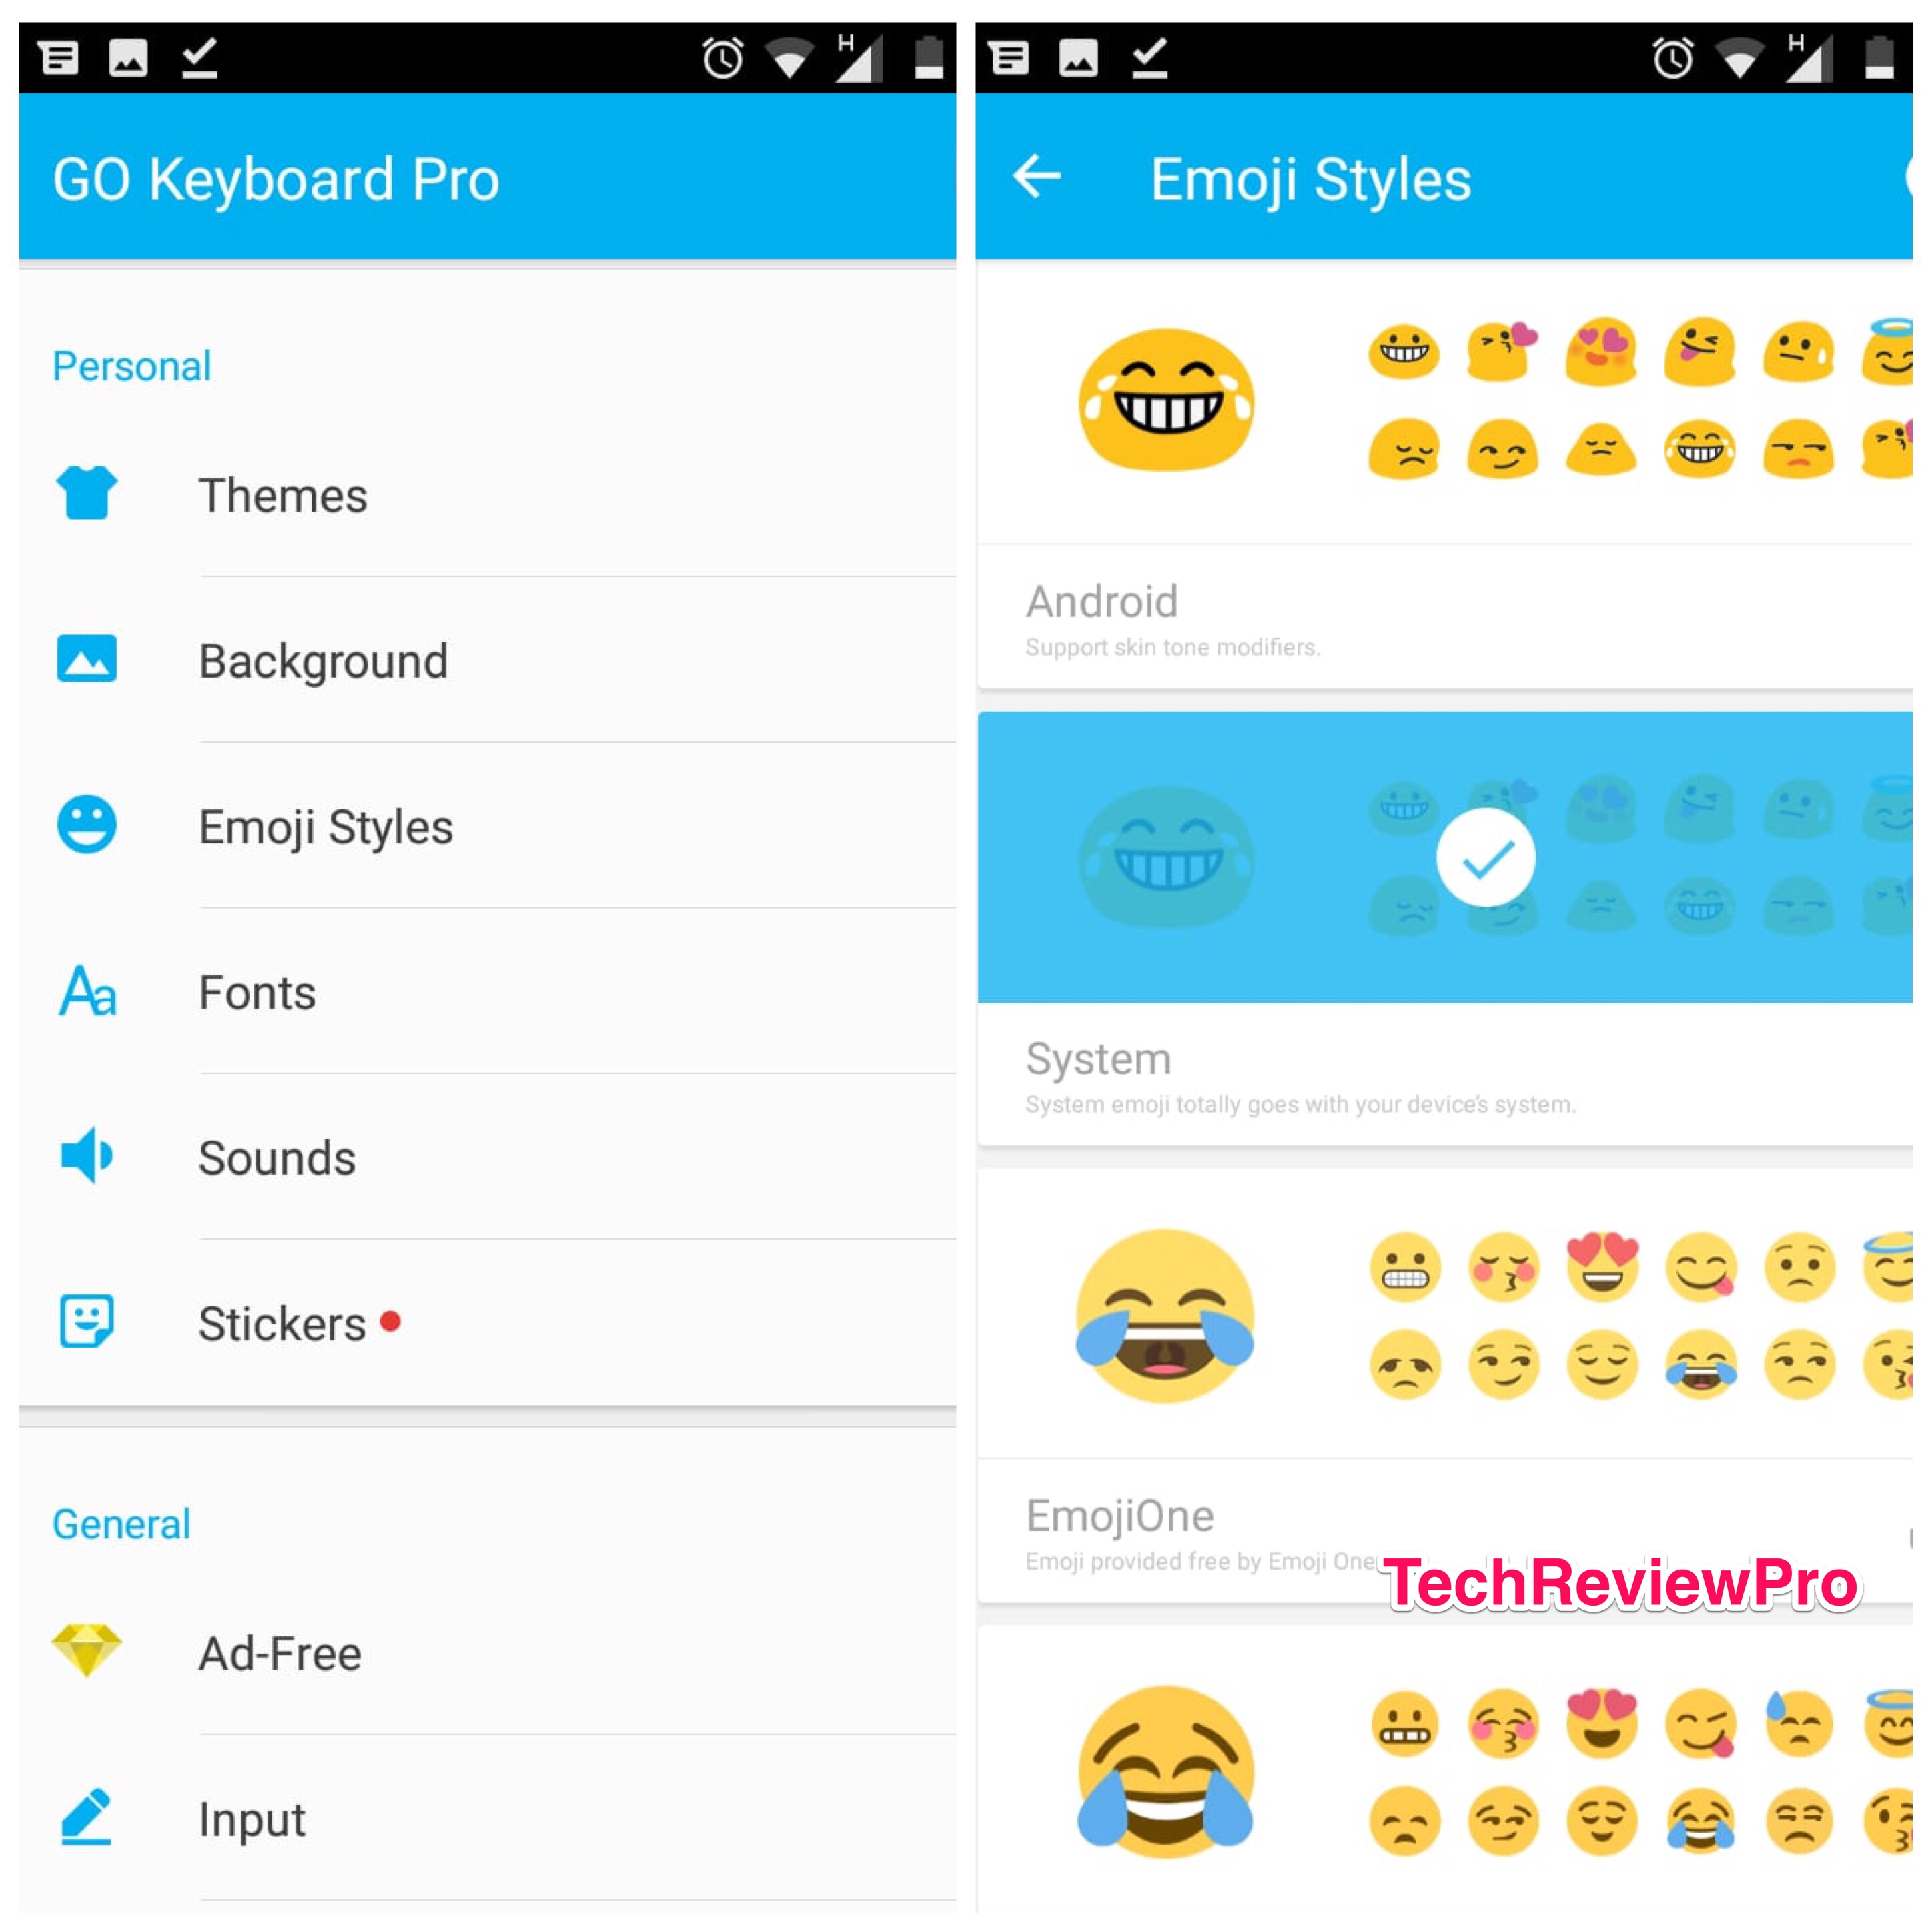 Go Keyboard Pro - Best Keyboards with Emojis for Android - Animated Emoji App